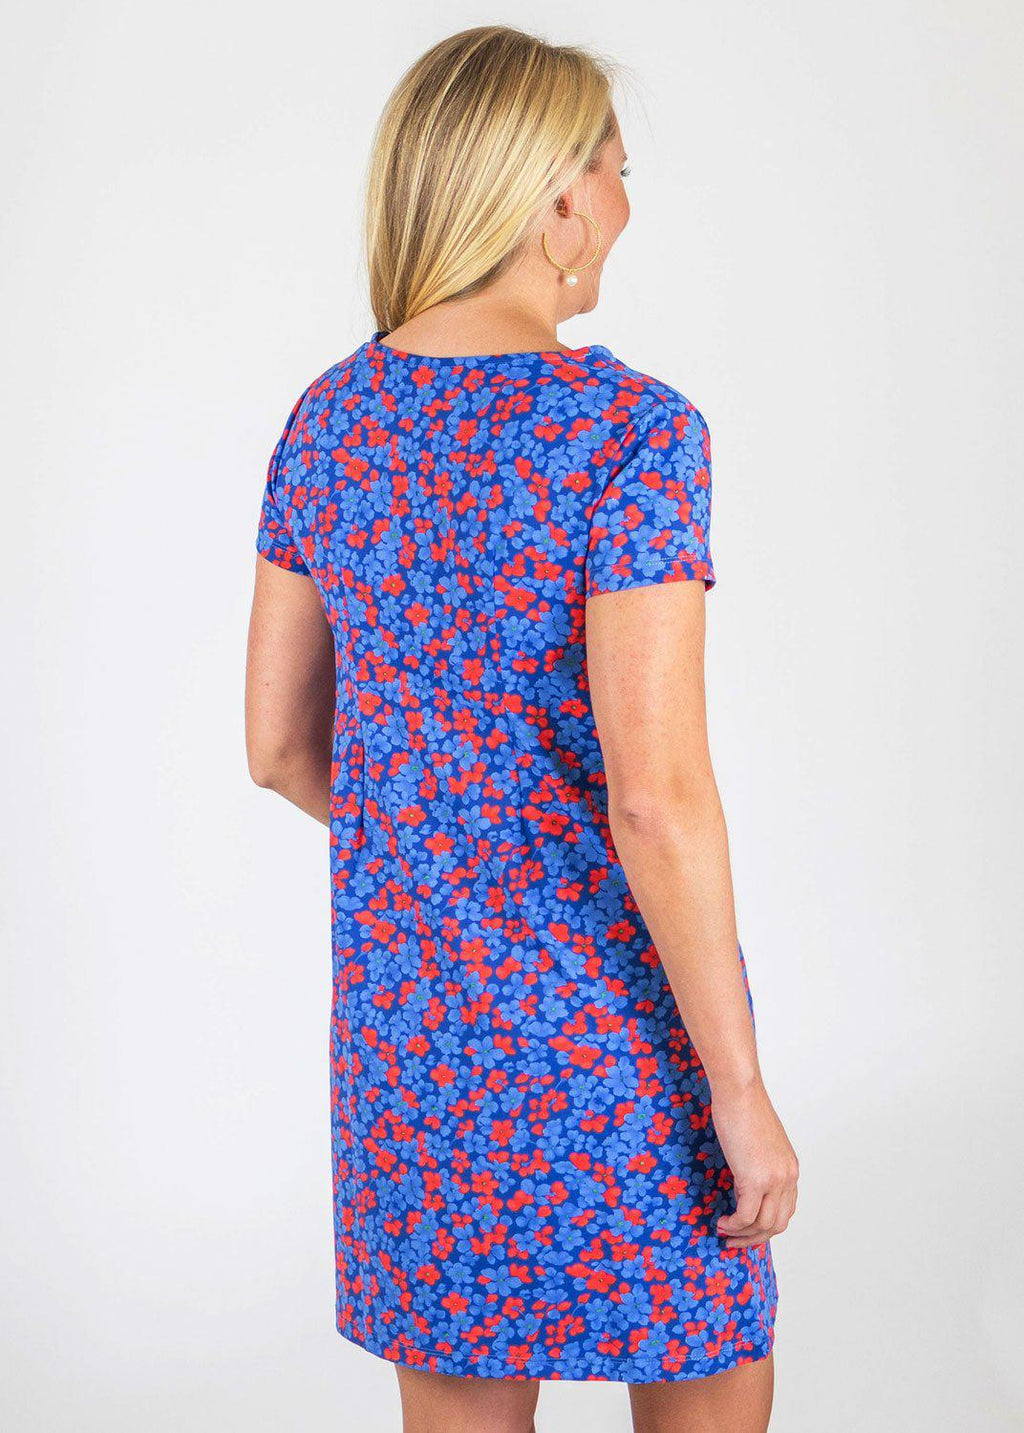 Blue & Red Marina Dress in a Floral Print